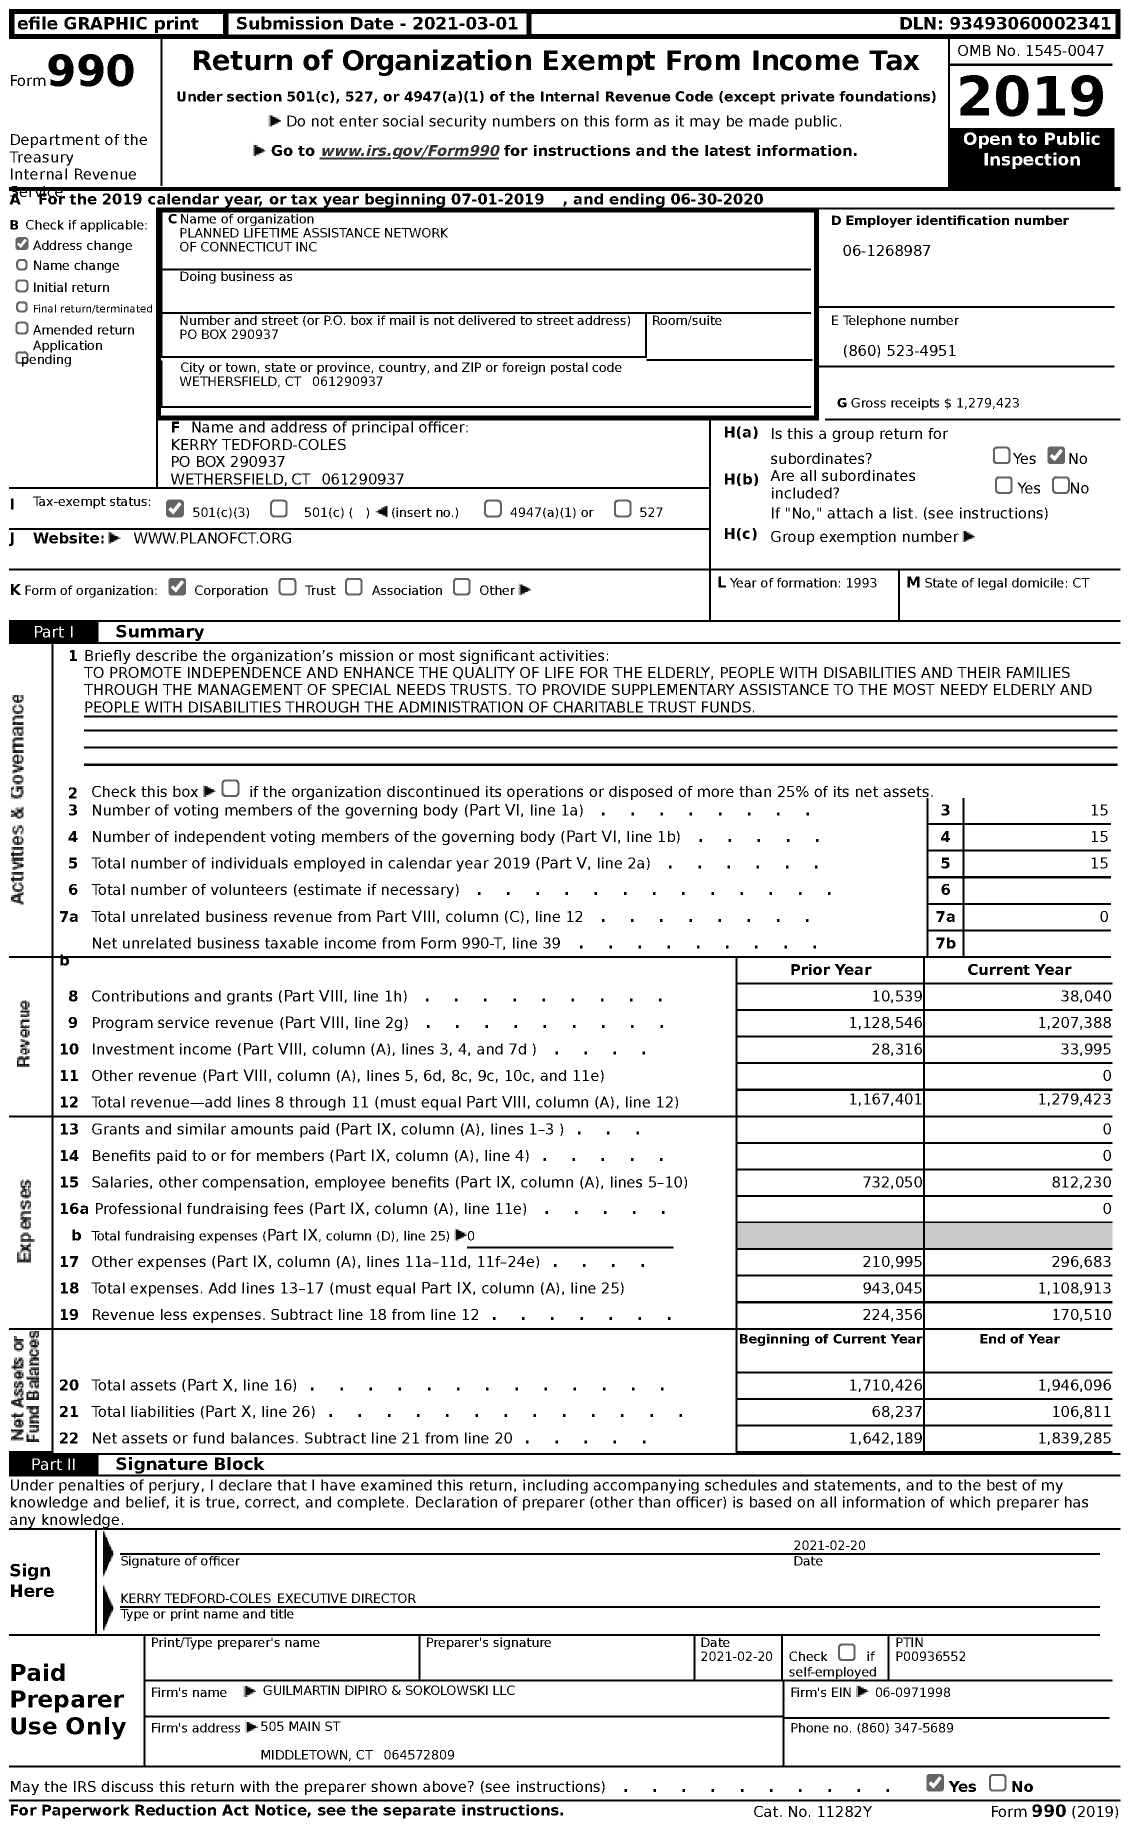 Image of first page of 2019 Form 990 for Planned Lifetime Assistance Network of Connecticut